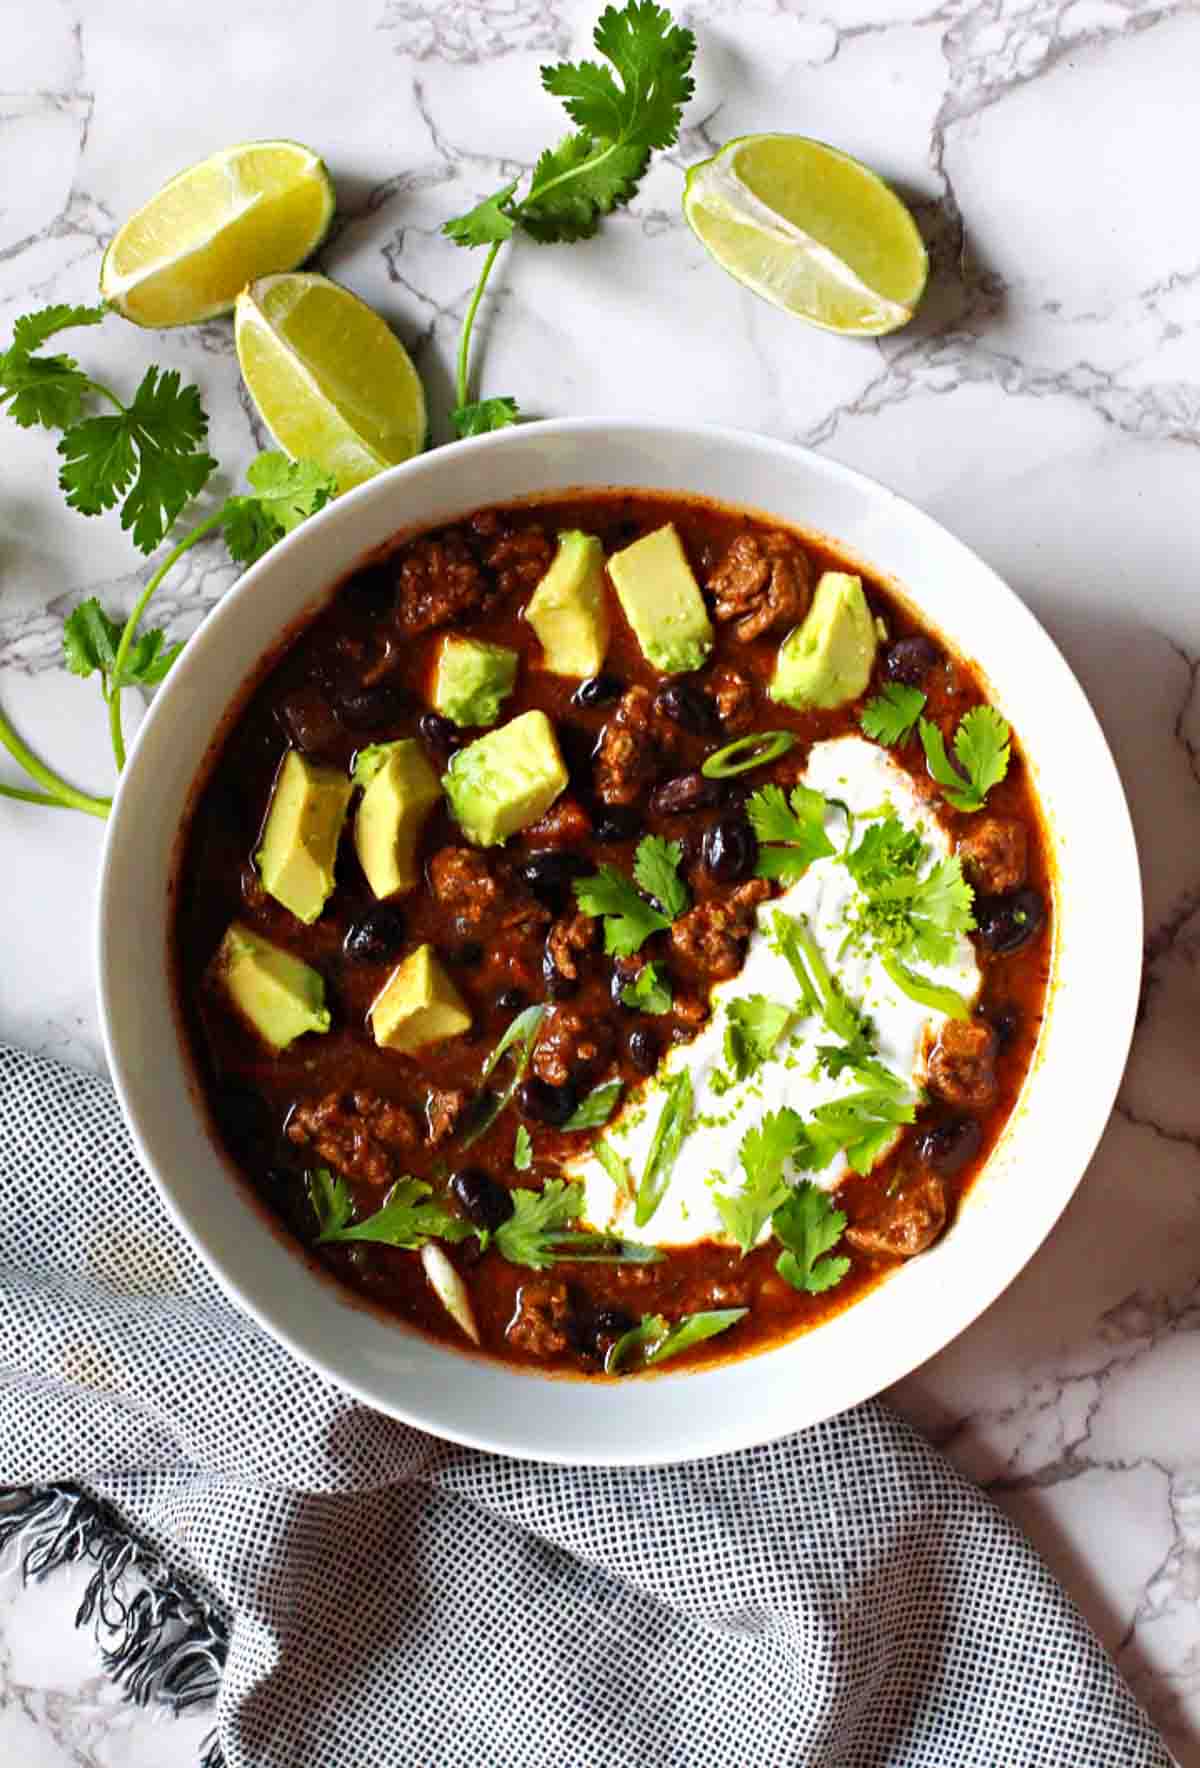 Bison Chile with Black beans topped with chopped avocado and sour cream.